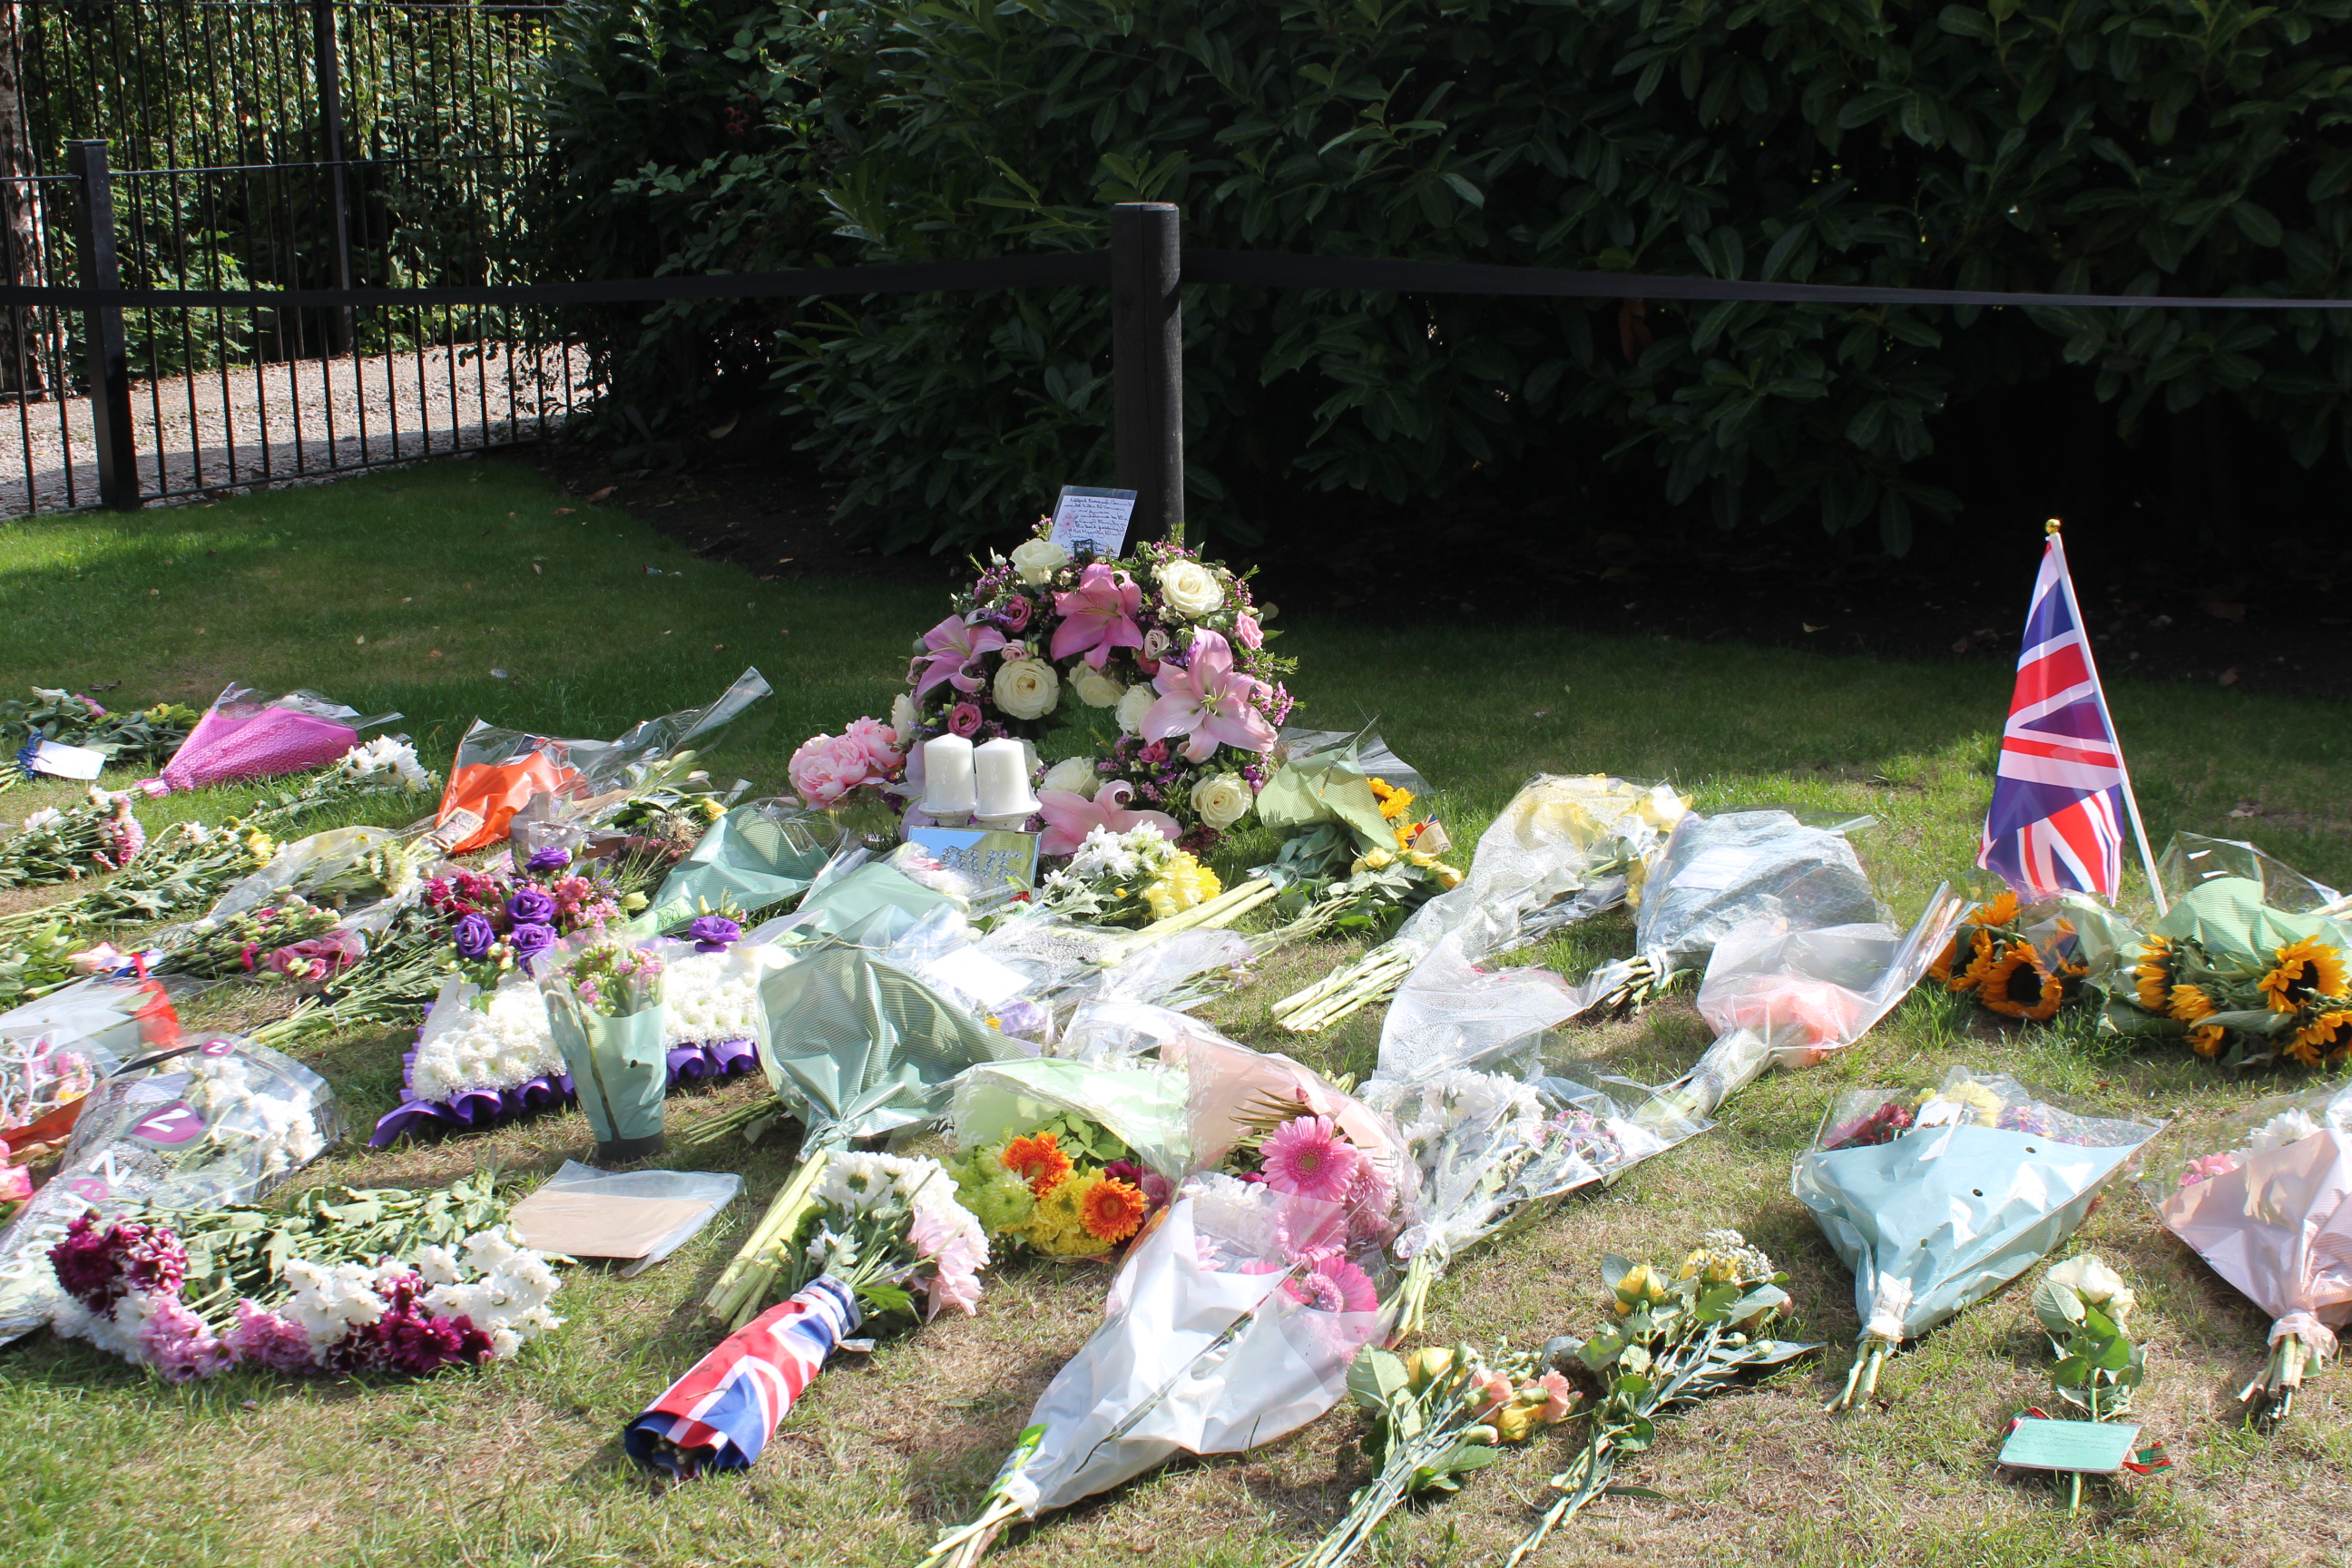 Image entitled Floral tributes to Her Majesty left by local residents at the Memorial Gardens in Ashford Town Centre